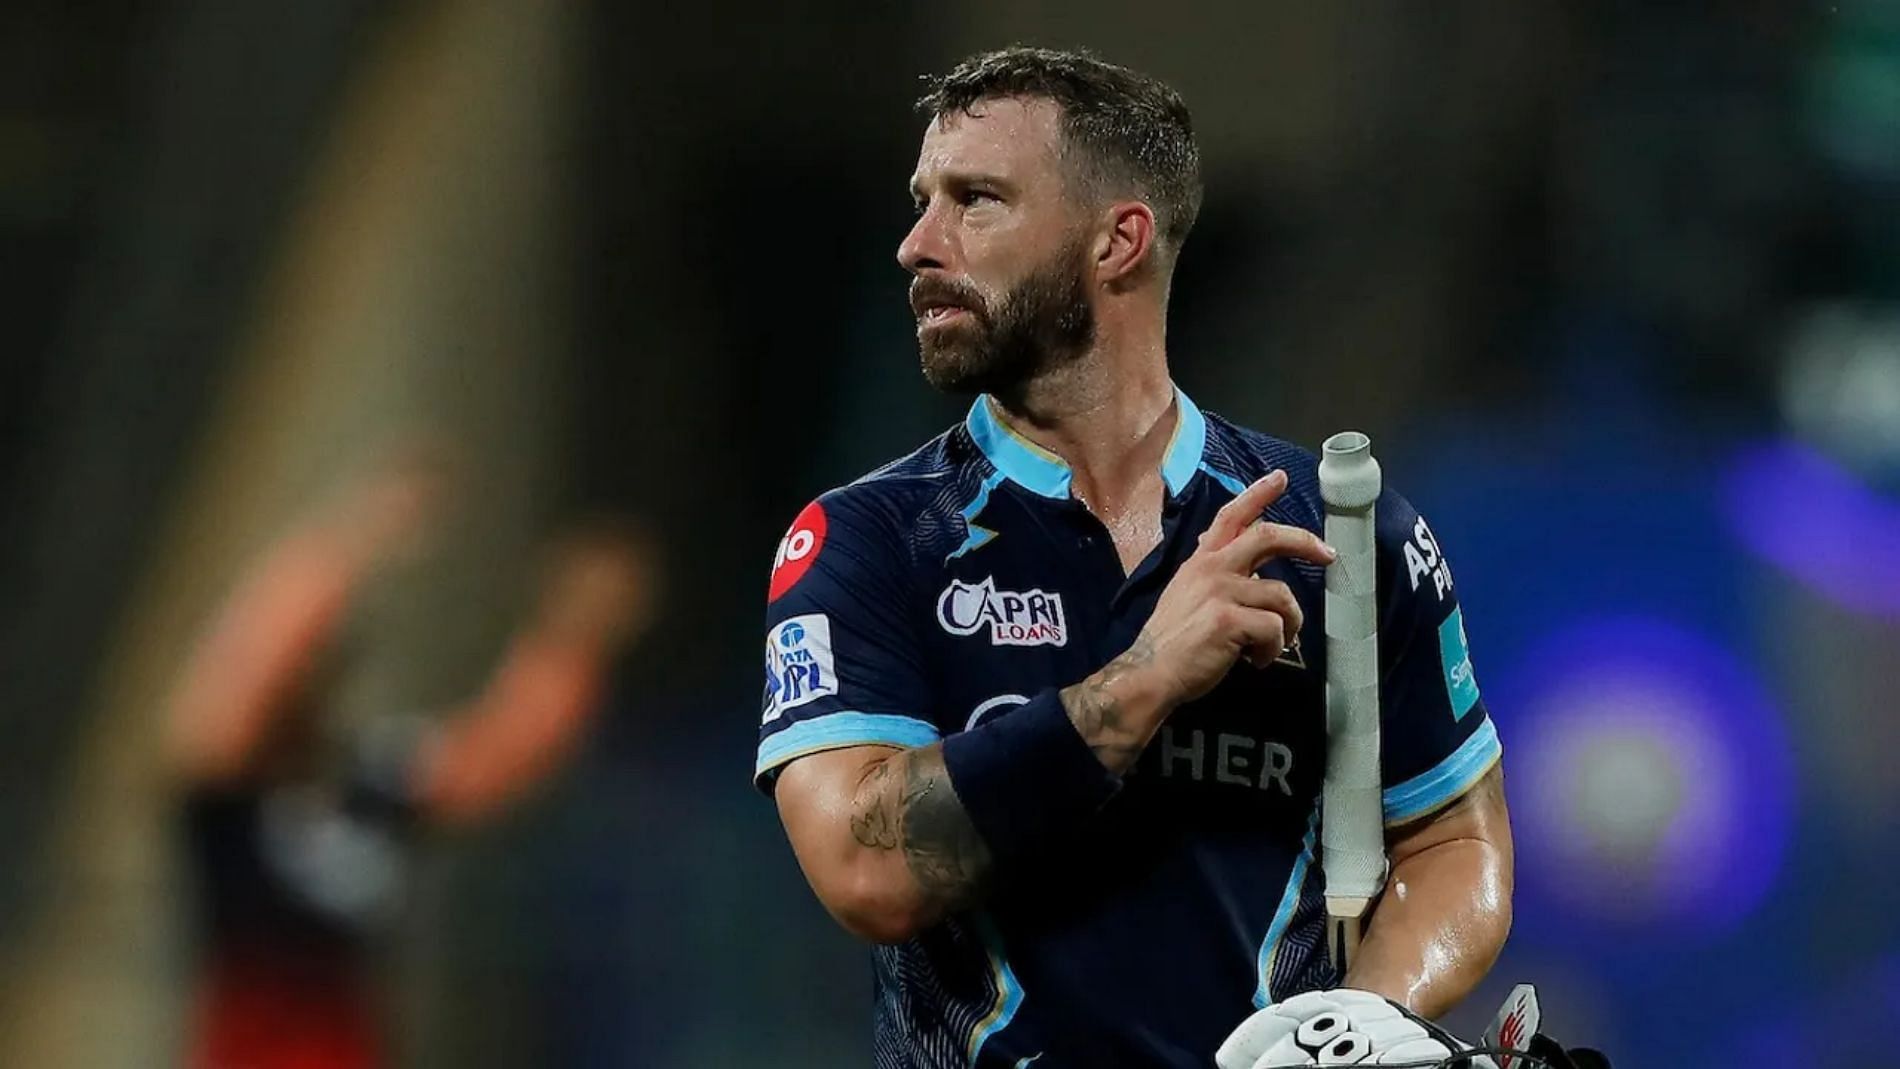 IPL 2022 Matthew Wade reprimanded for outburst following controversial